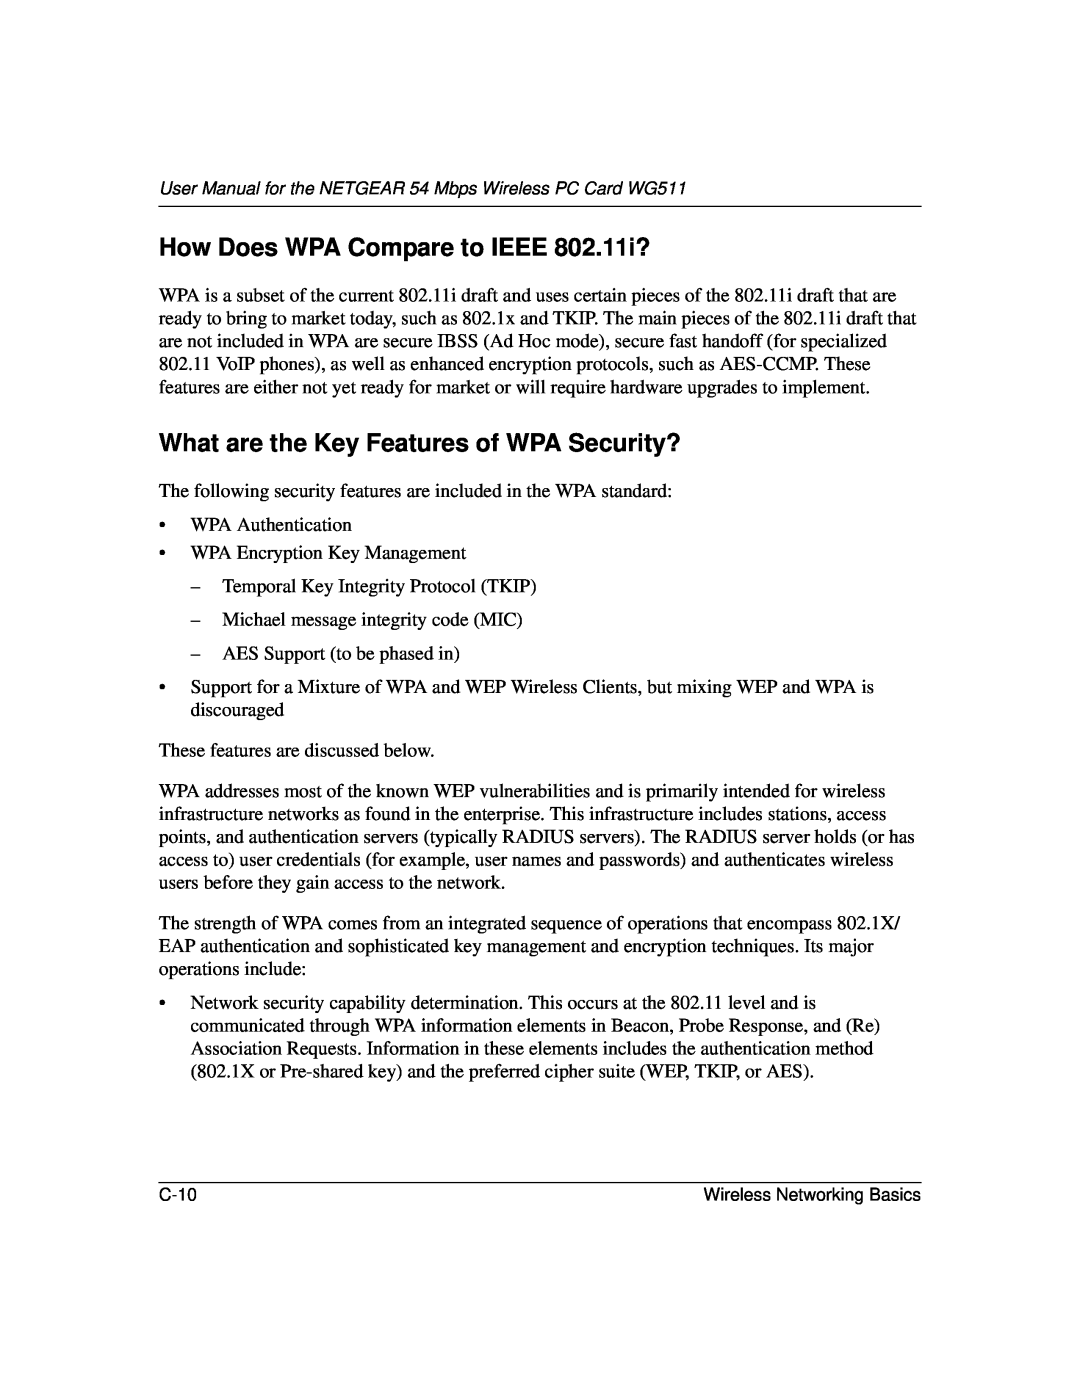 NETGEAR WGE111 user manual How Does WPA Compare to IEEE 802.11i?, What are the Key Features of WPA Security? 